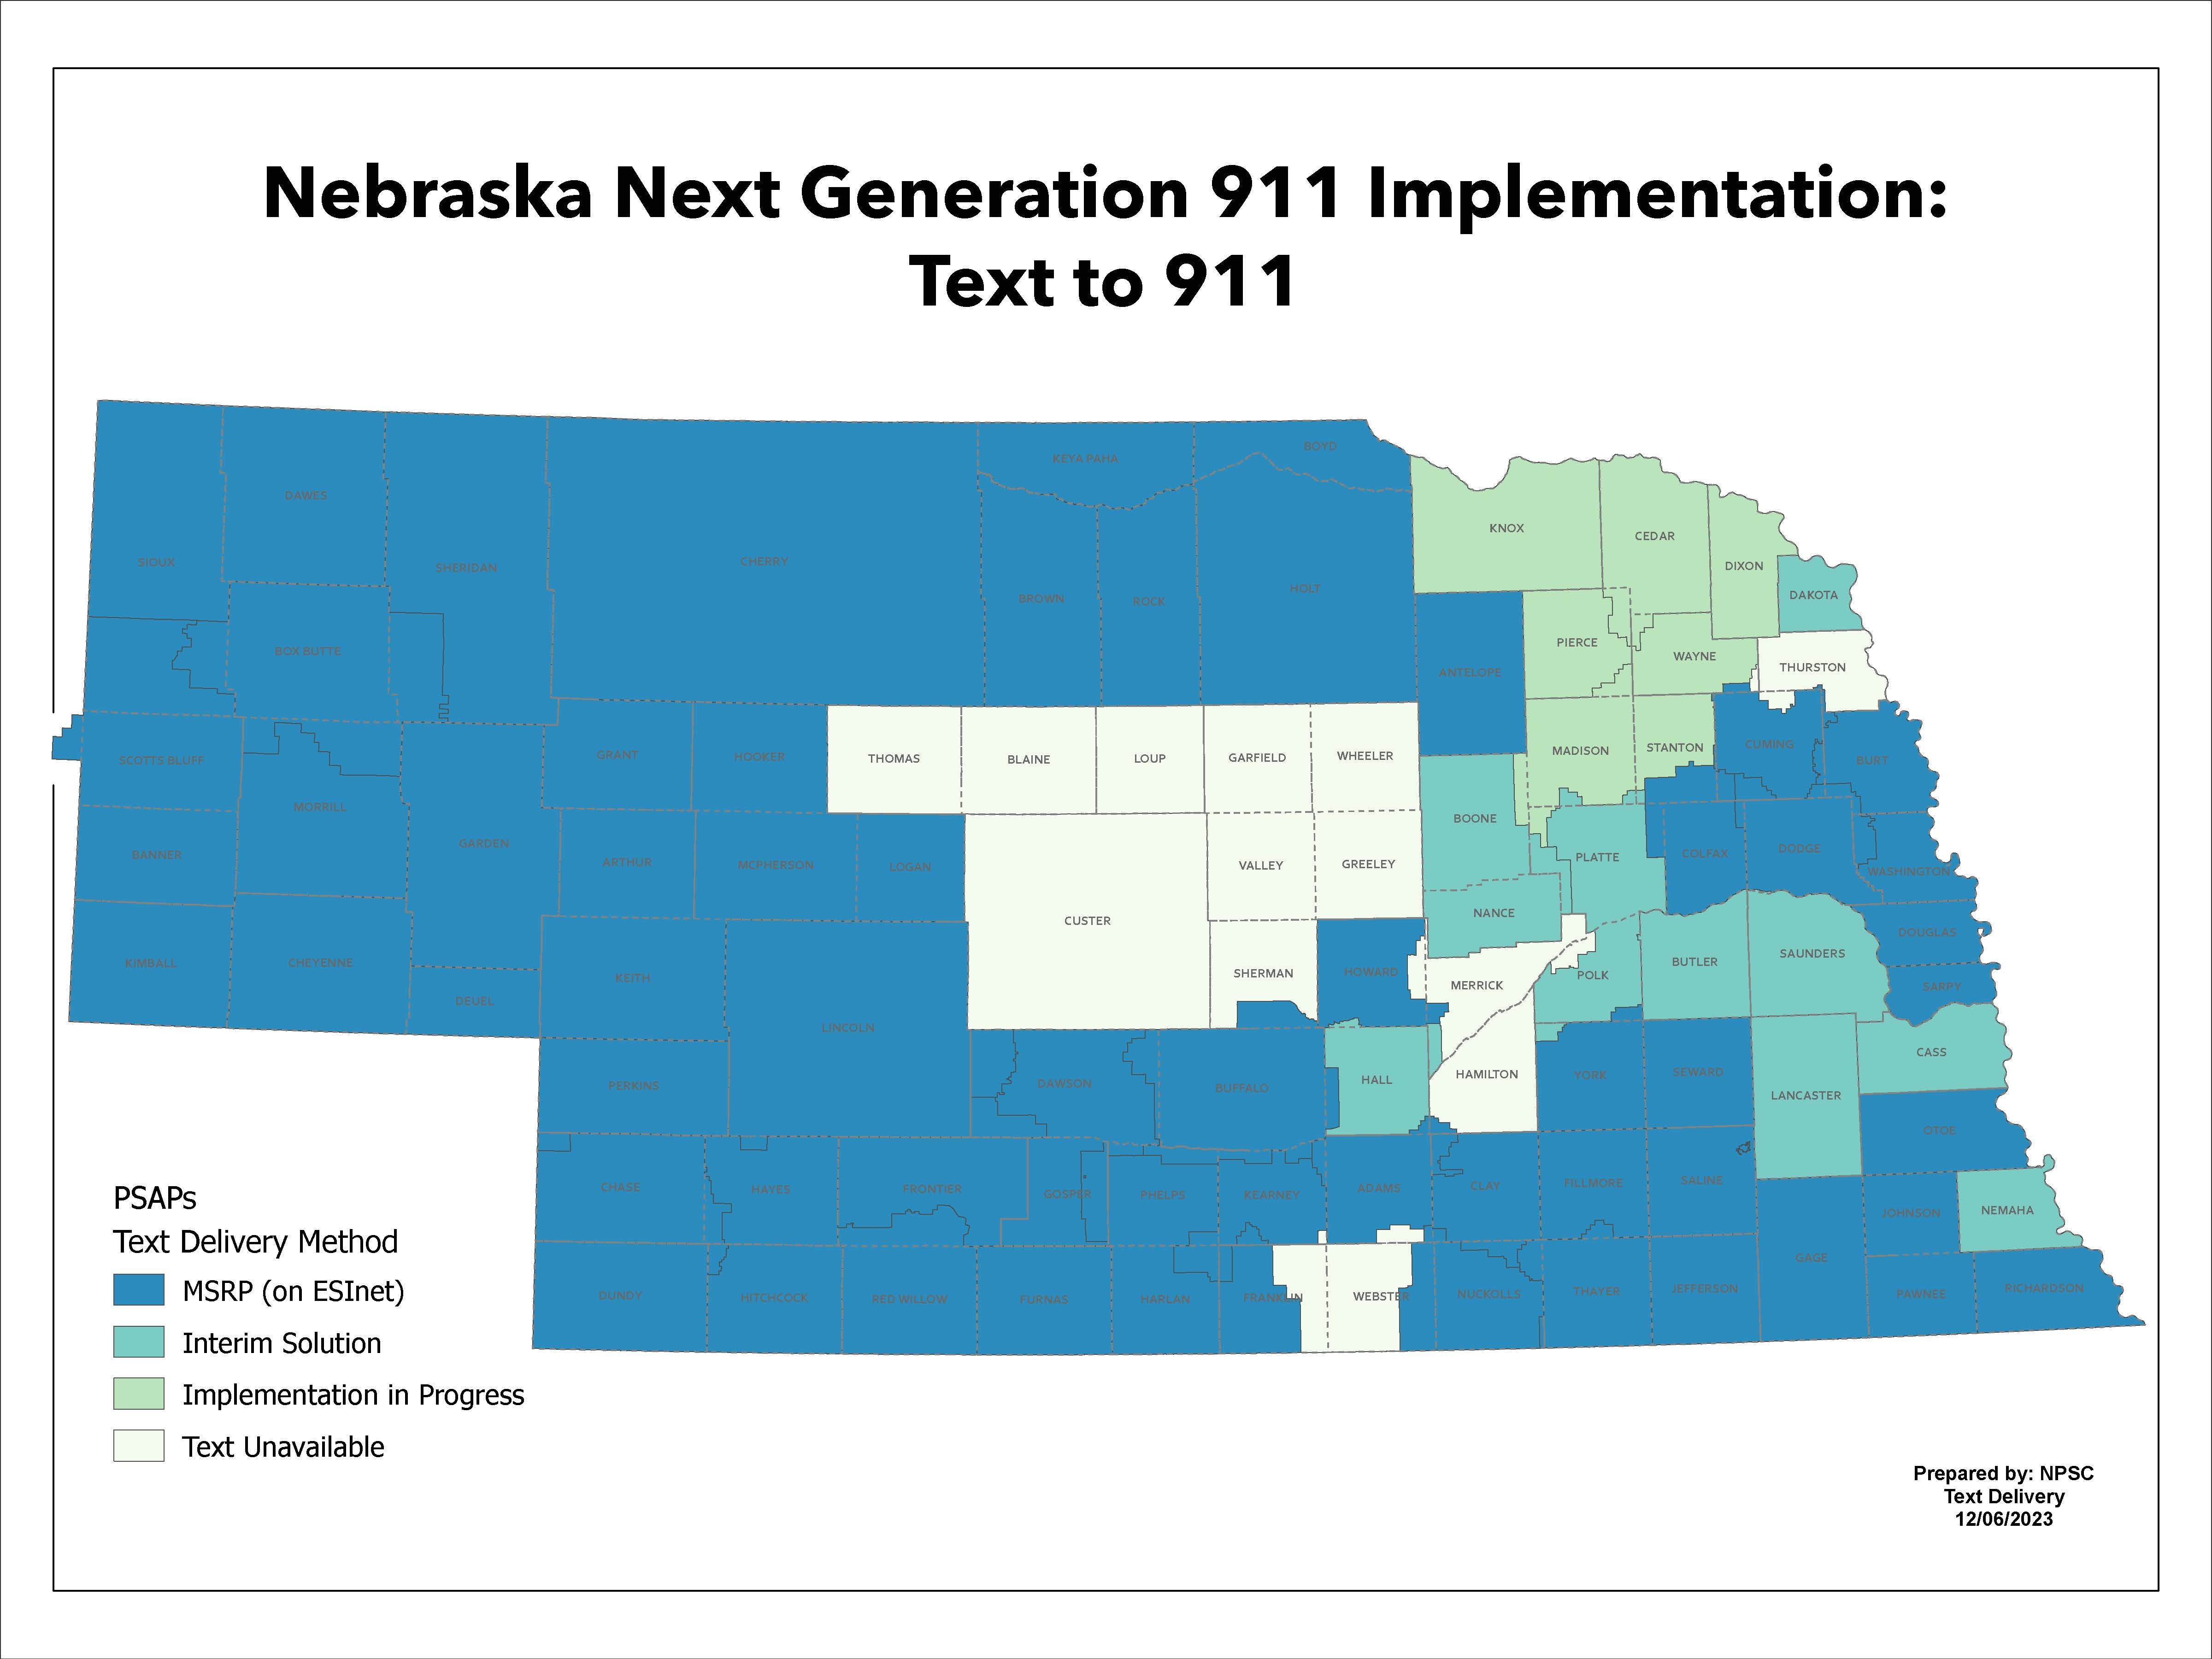 Text to 911 Implementation Map